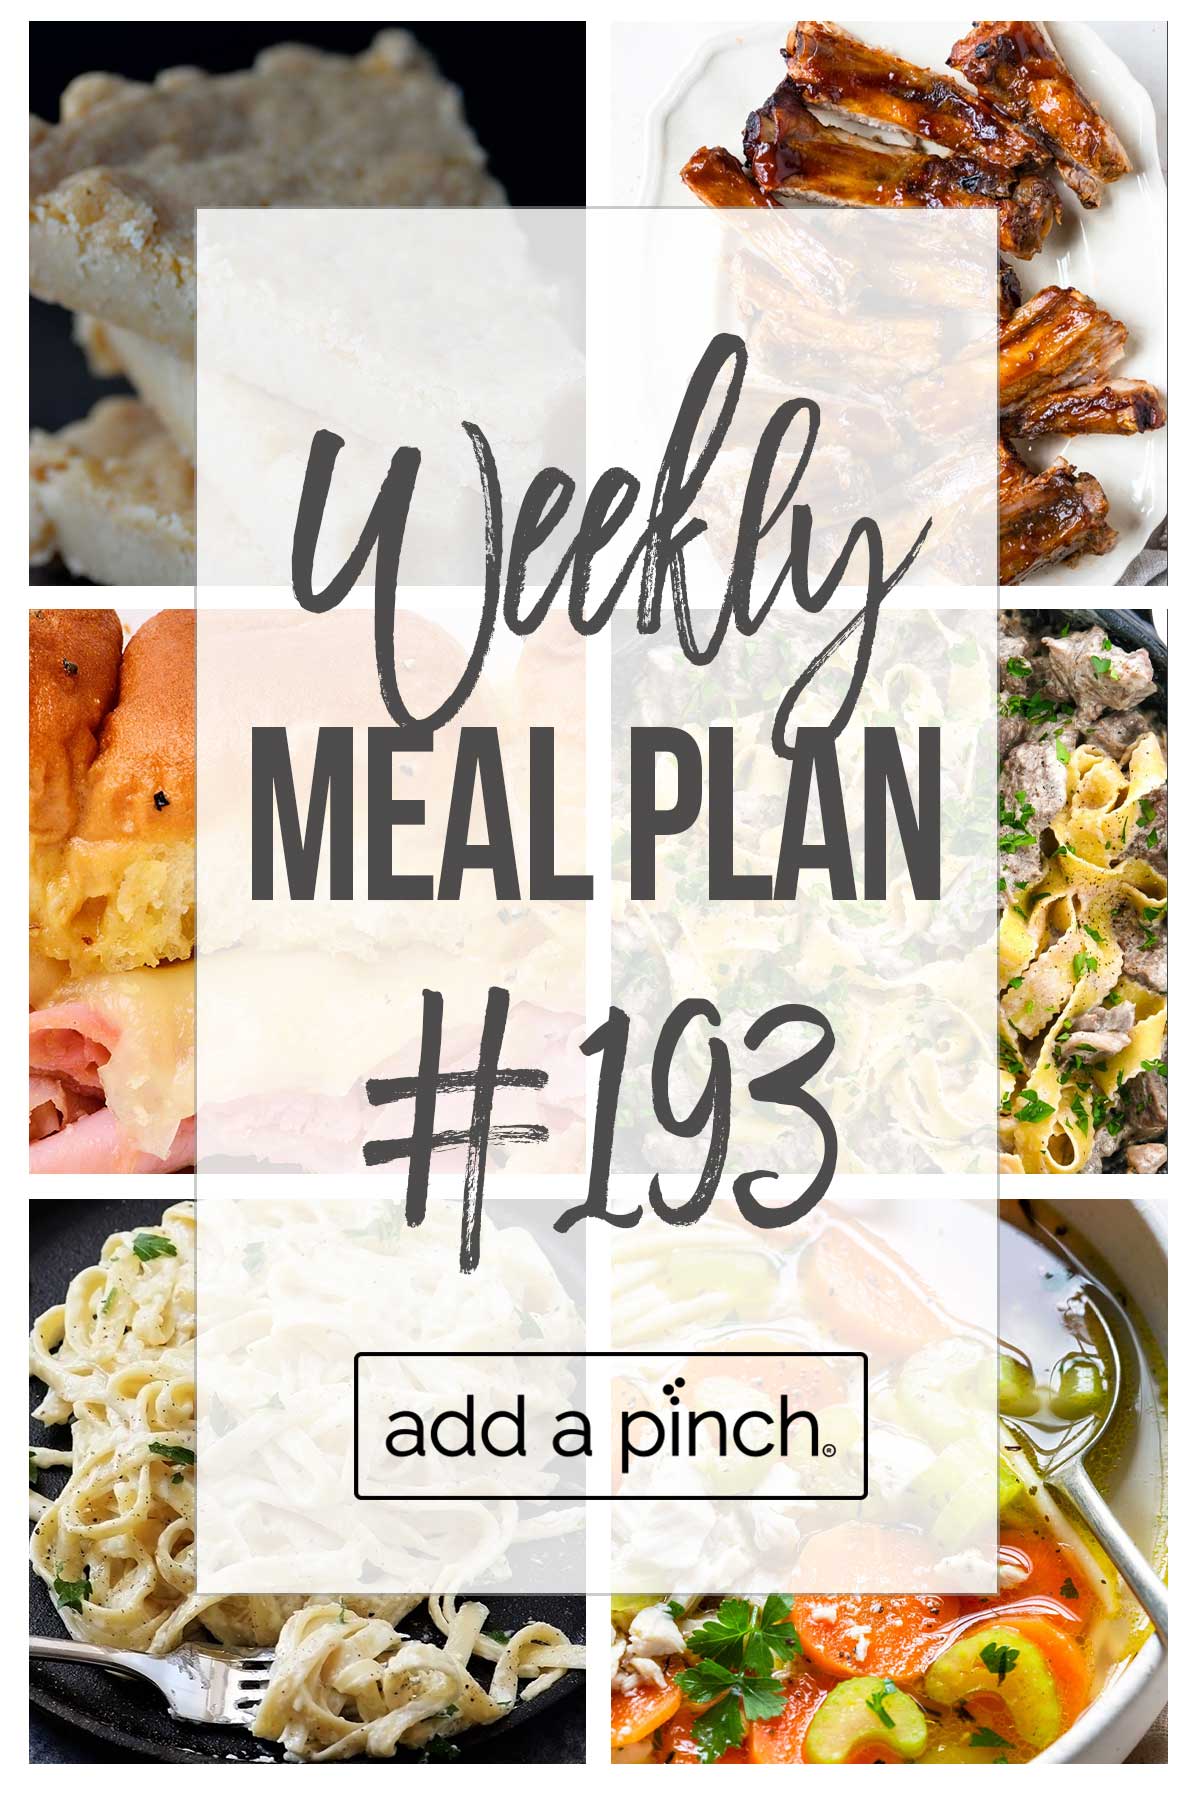 Graphic of Weekly Meal Plan #193.